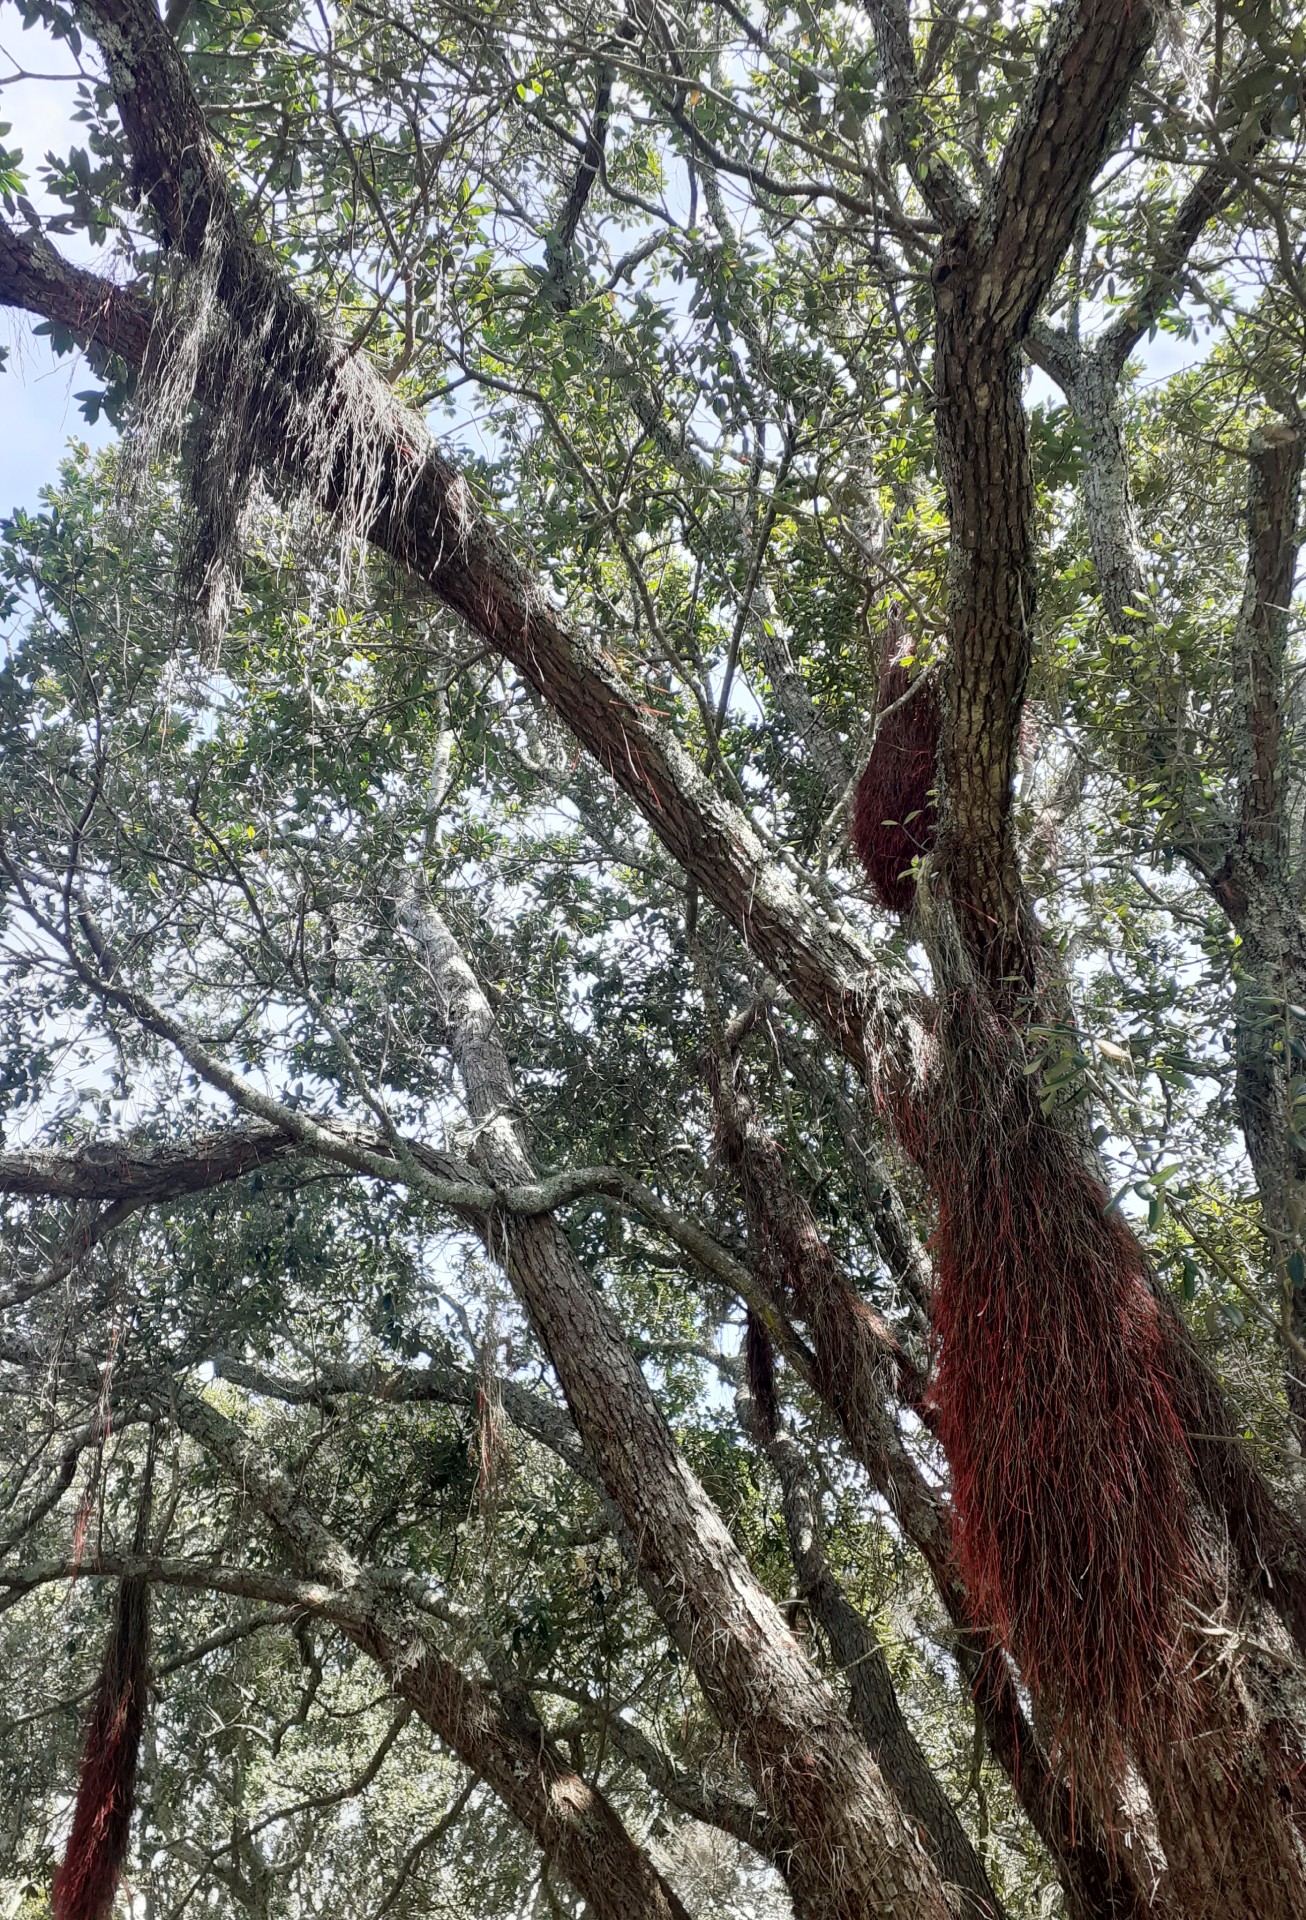 red chaff hanging from trees